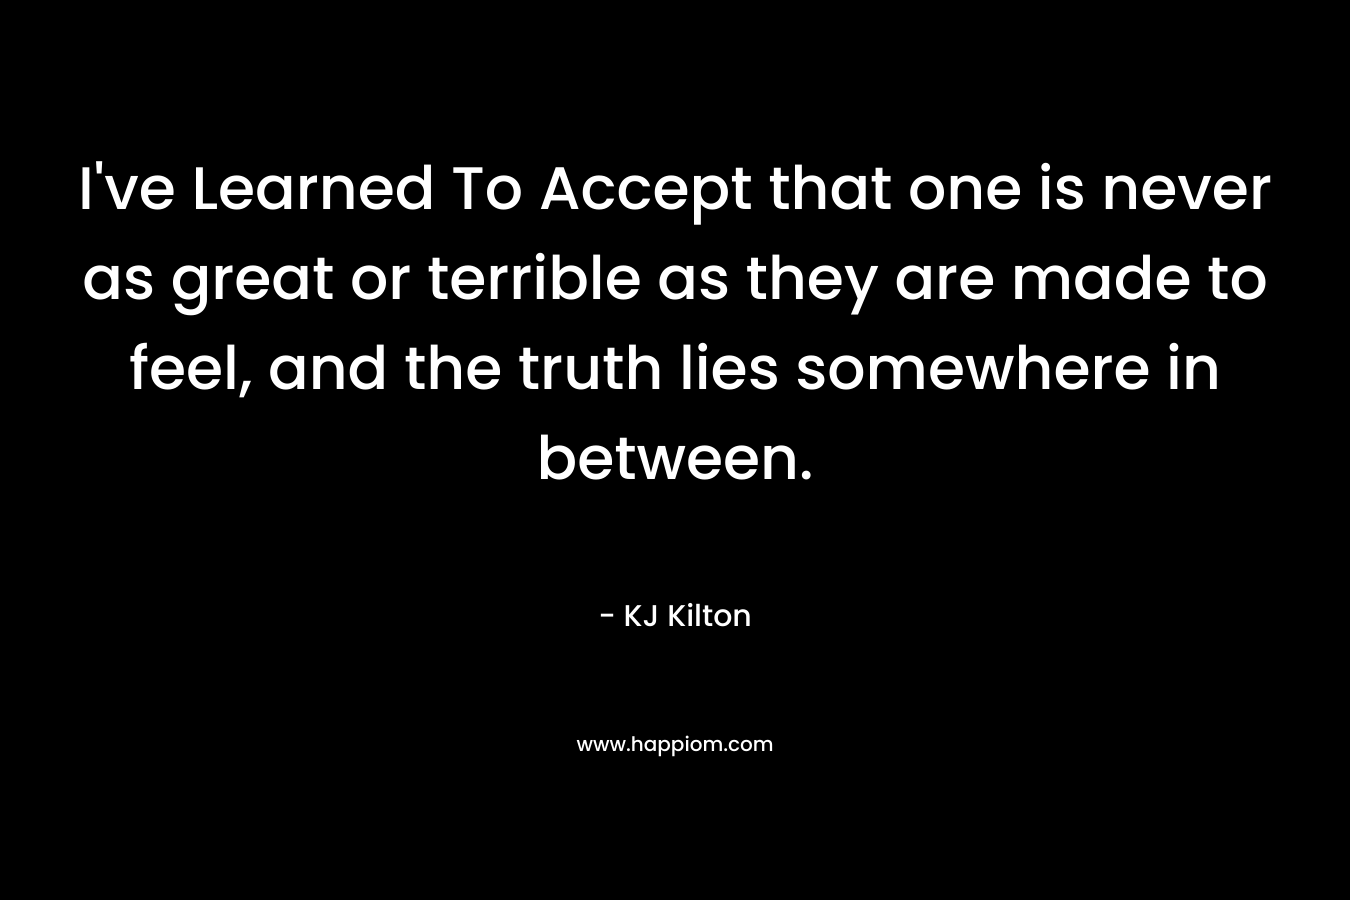 I’ve Learned To Accept that one is never as great or terrible as they are made to feel, and the truth lies somewhere in between. – KJ Kilton